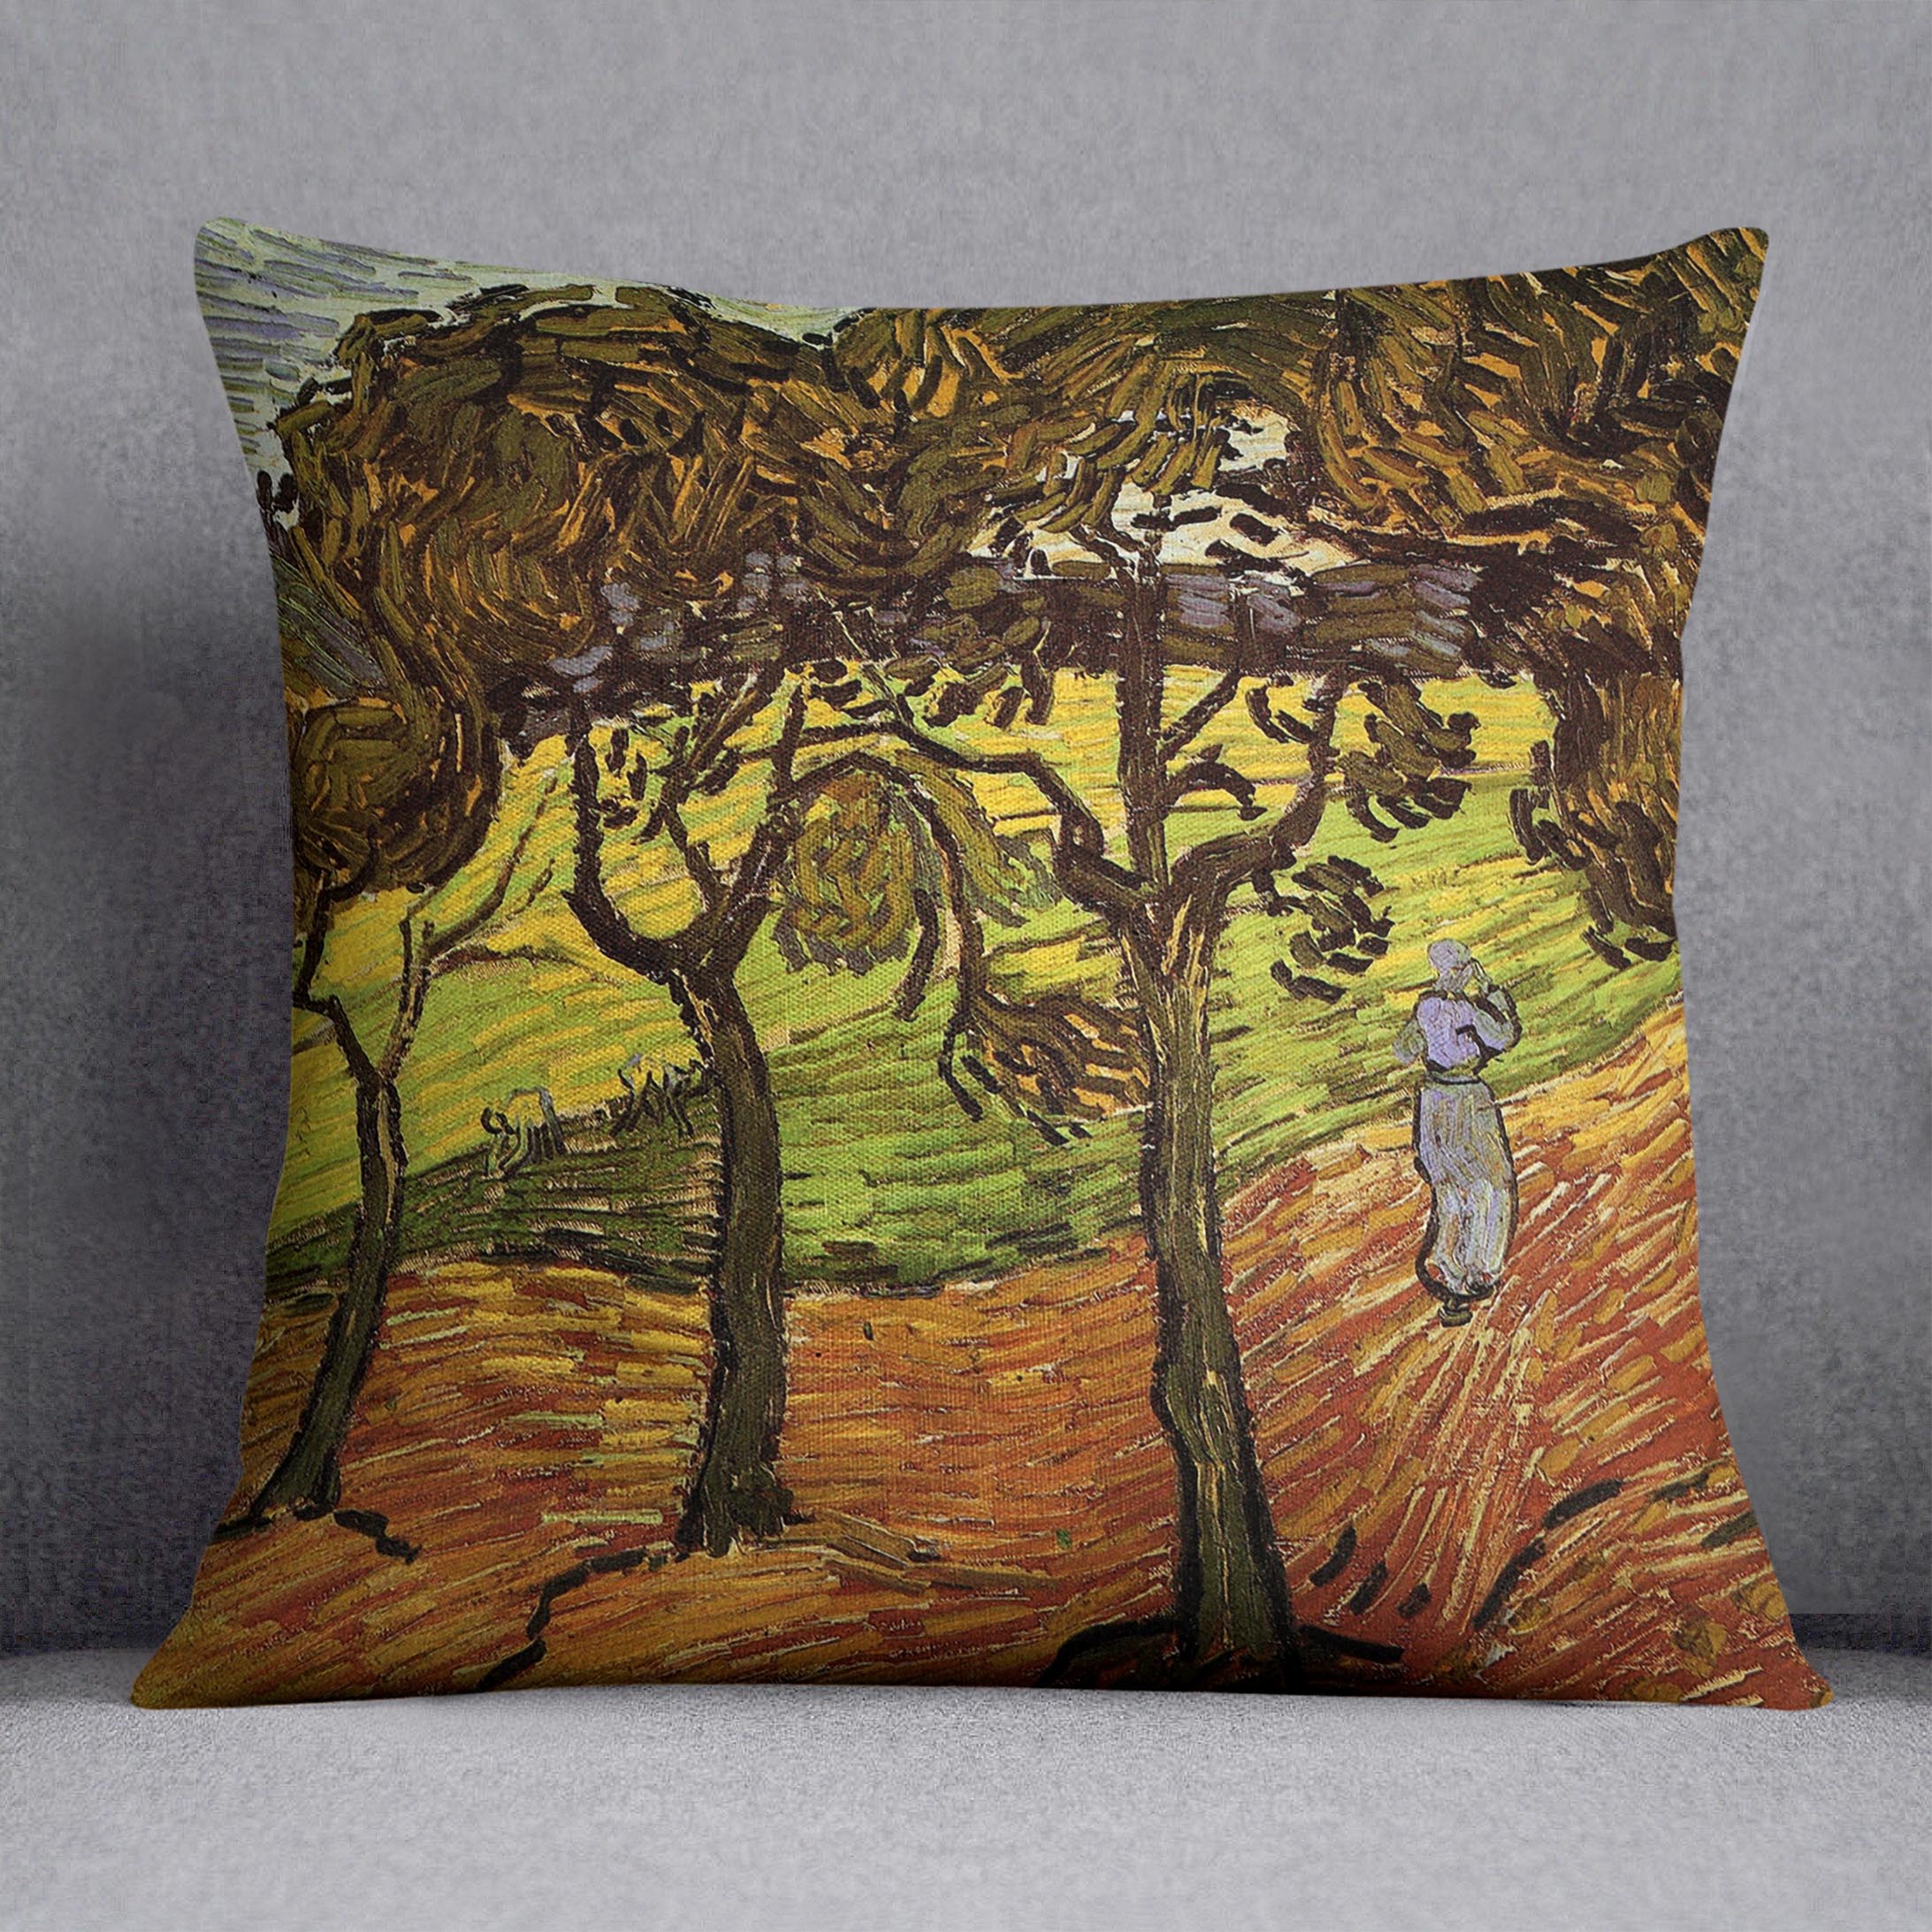 Landscape with Trees and Figures by Van Gogh Cushion